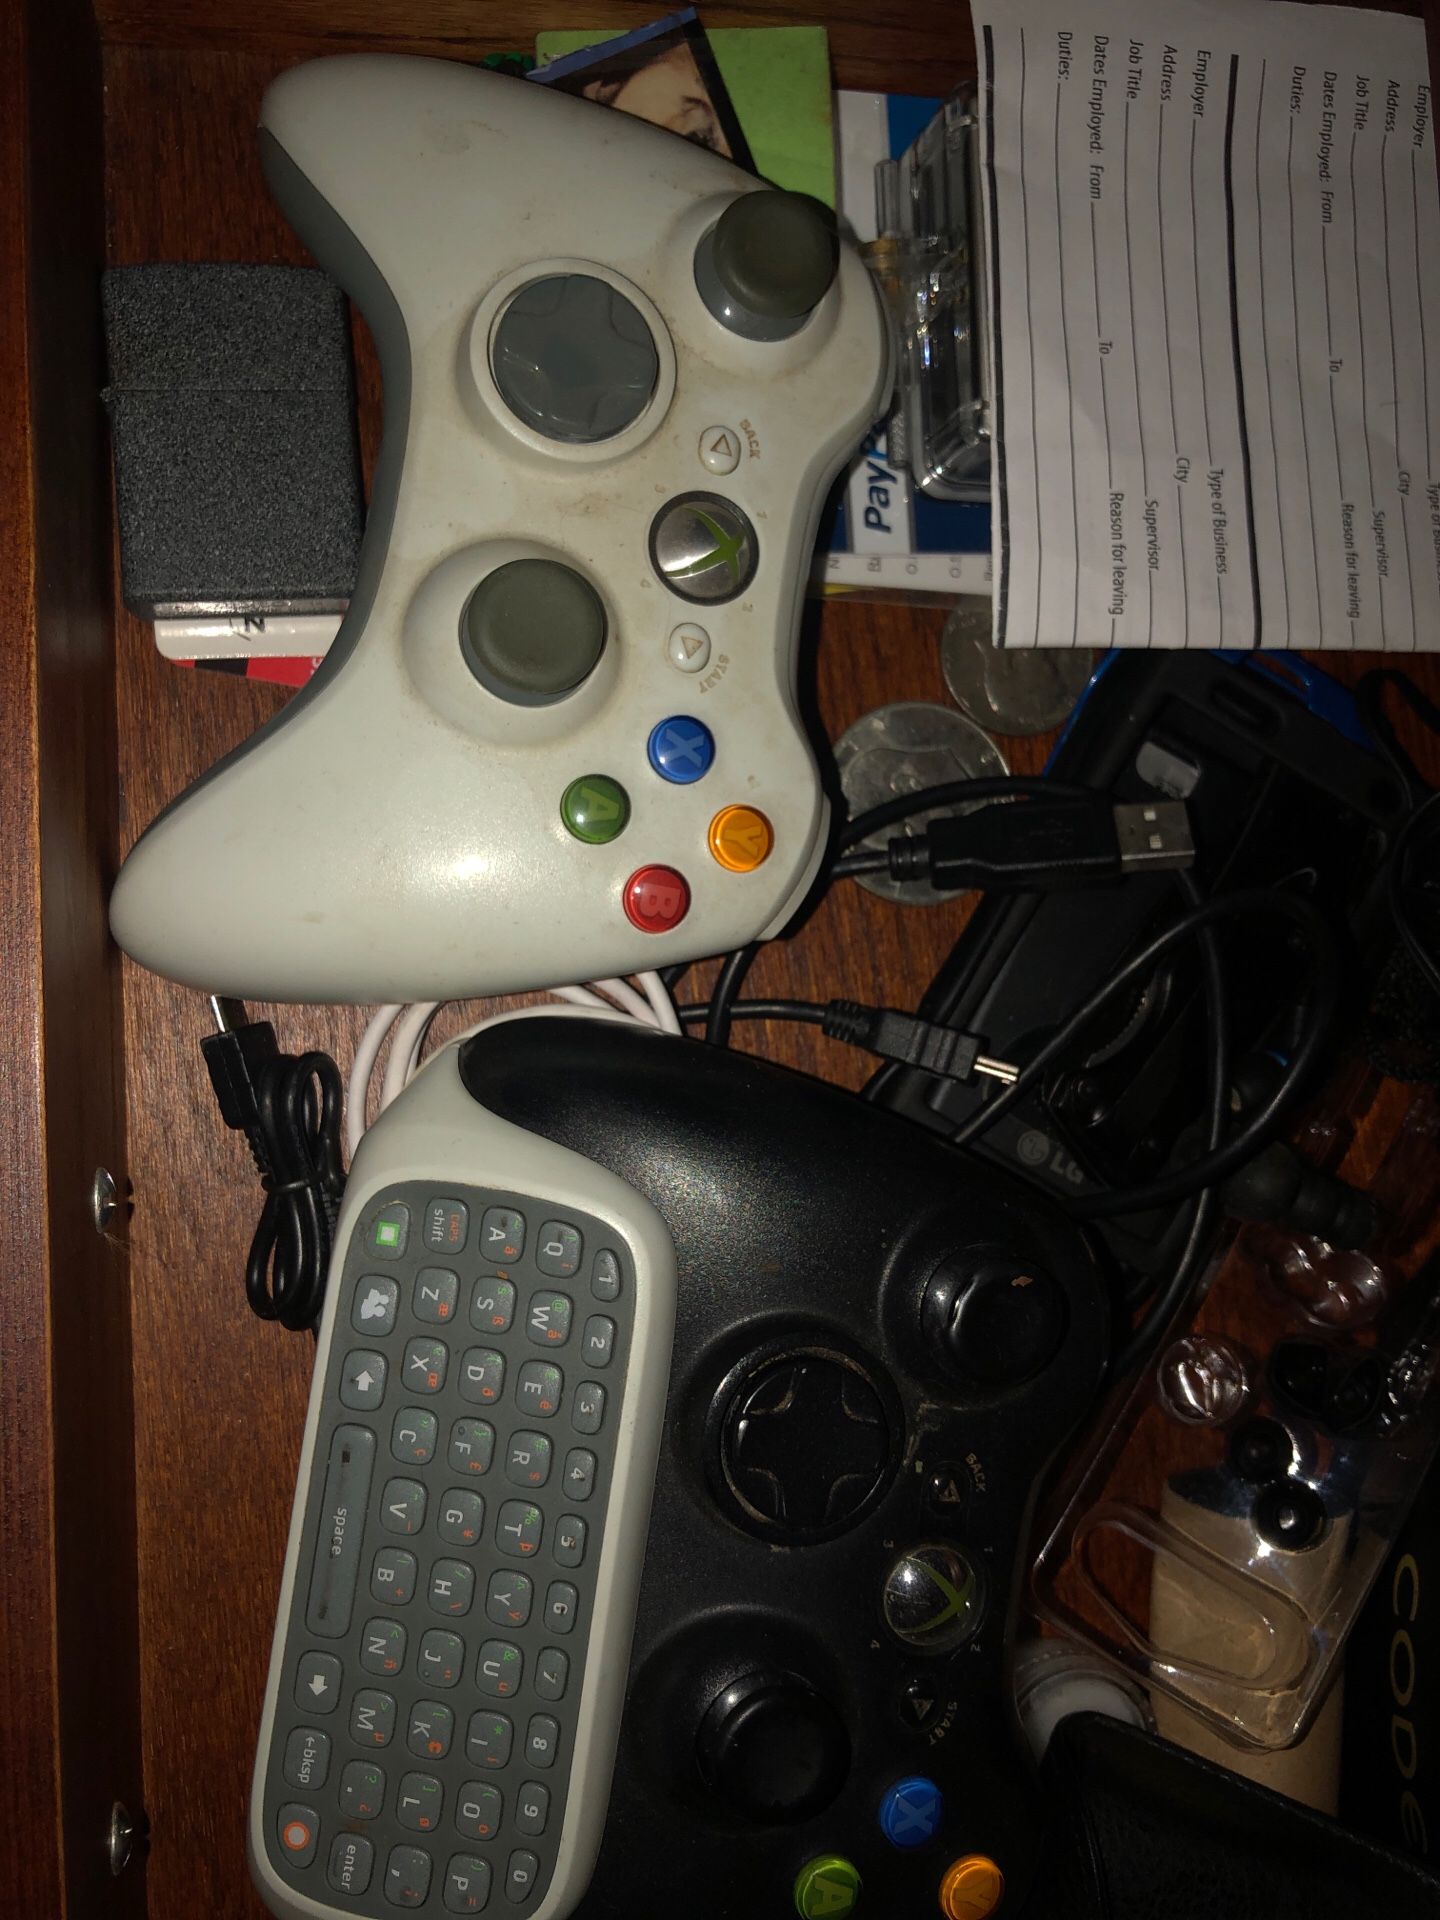 Xbox360 controllers with chat pad